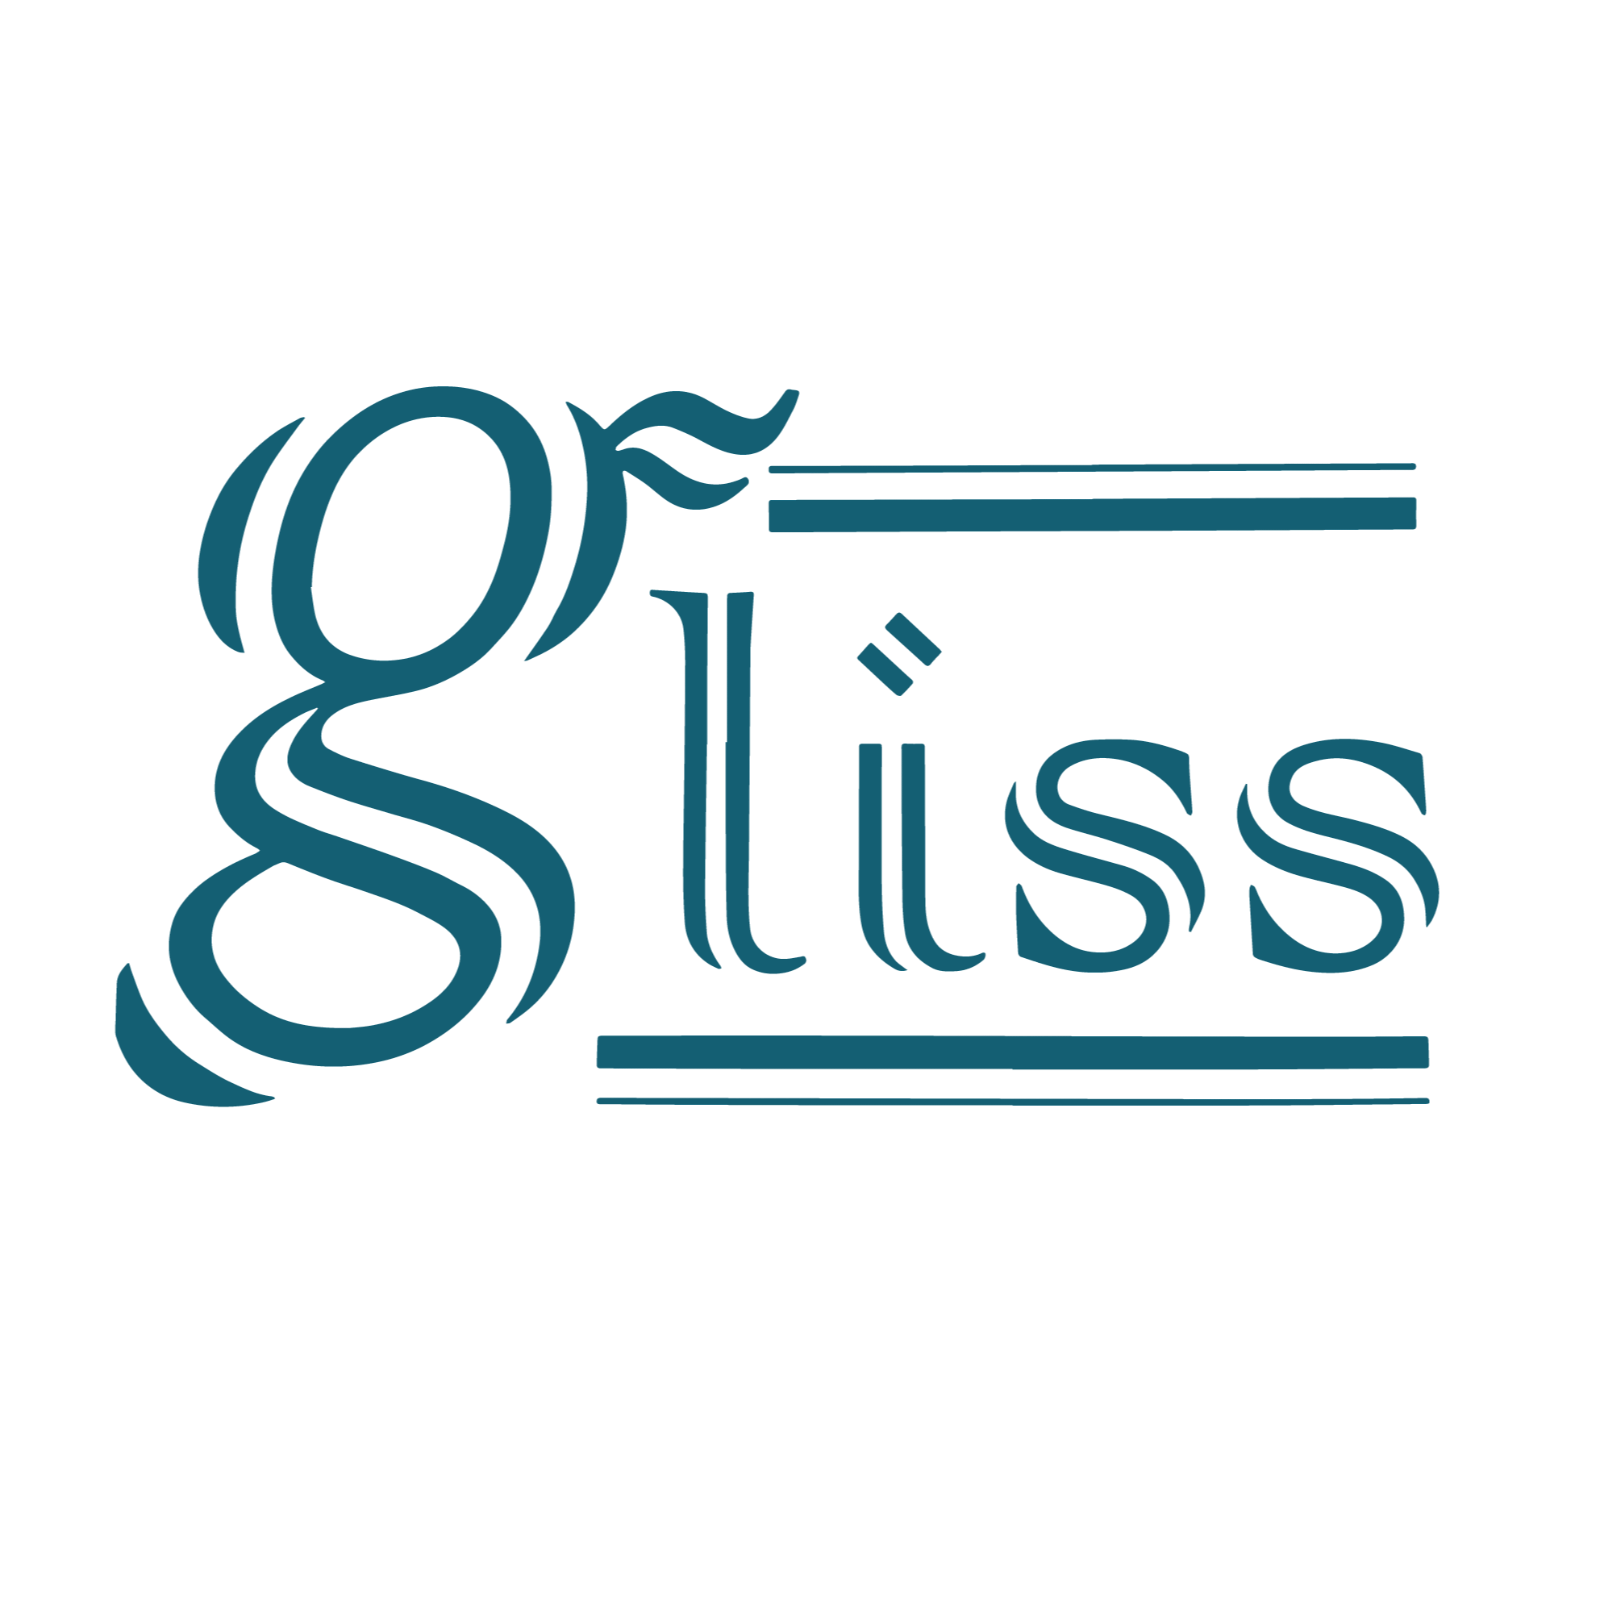 Gliss - Innovation with Business Sense